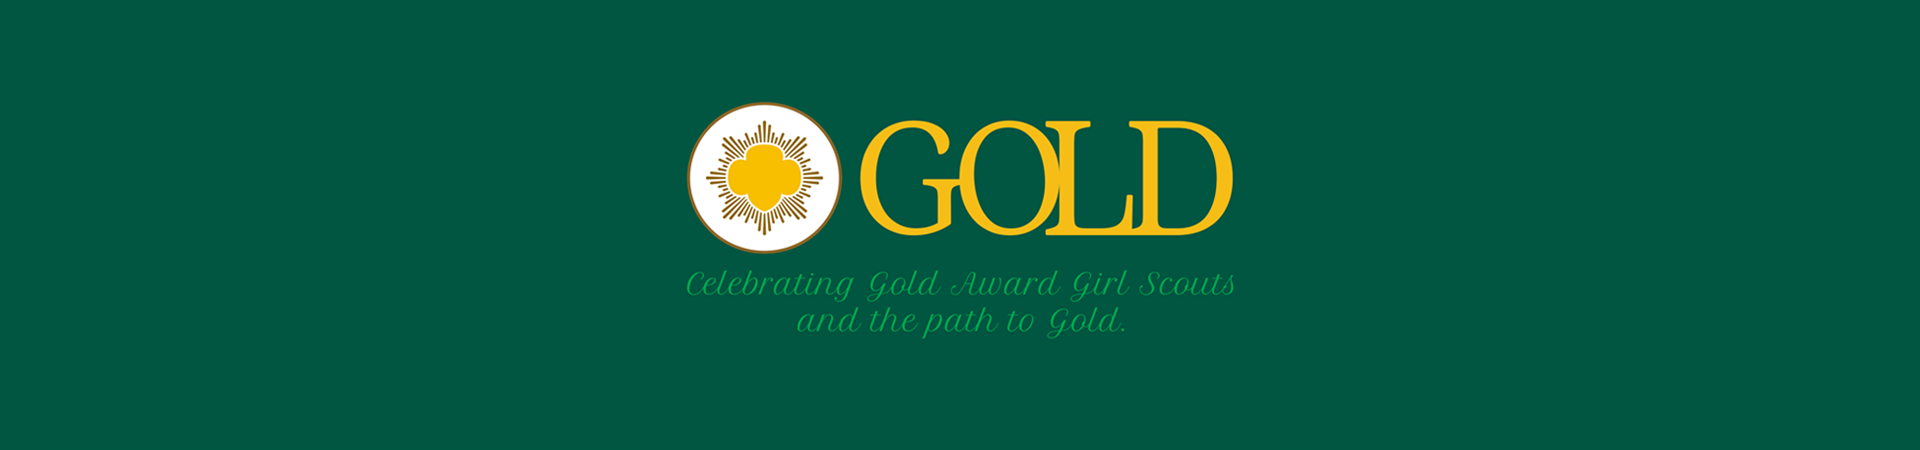  GOLD: Celebrating Gold Award Girl Scouts and the path to Gold 